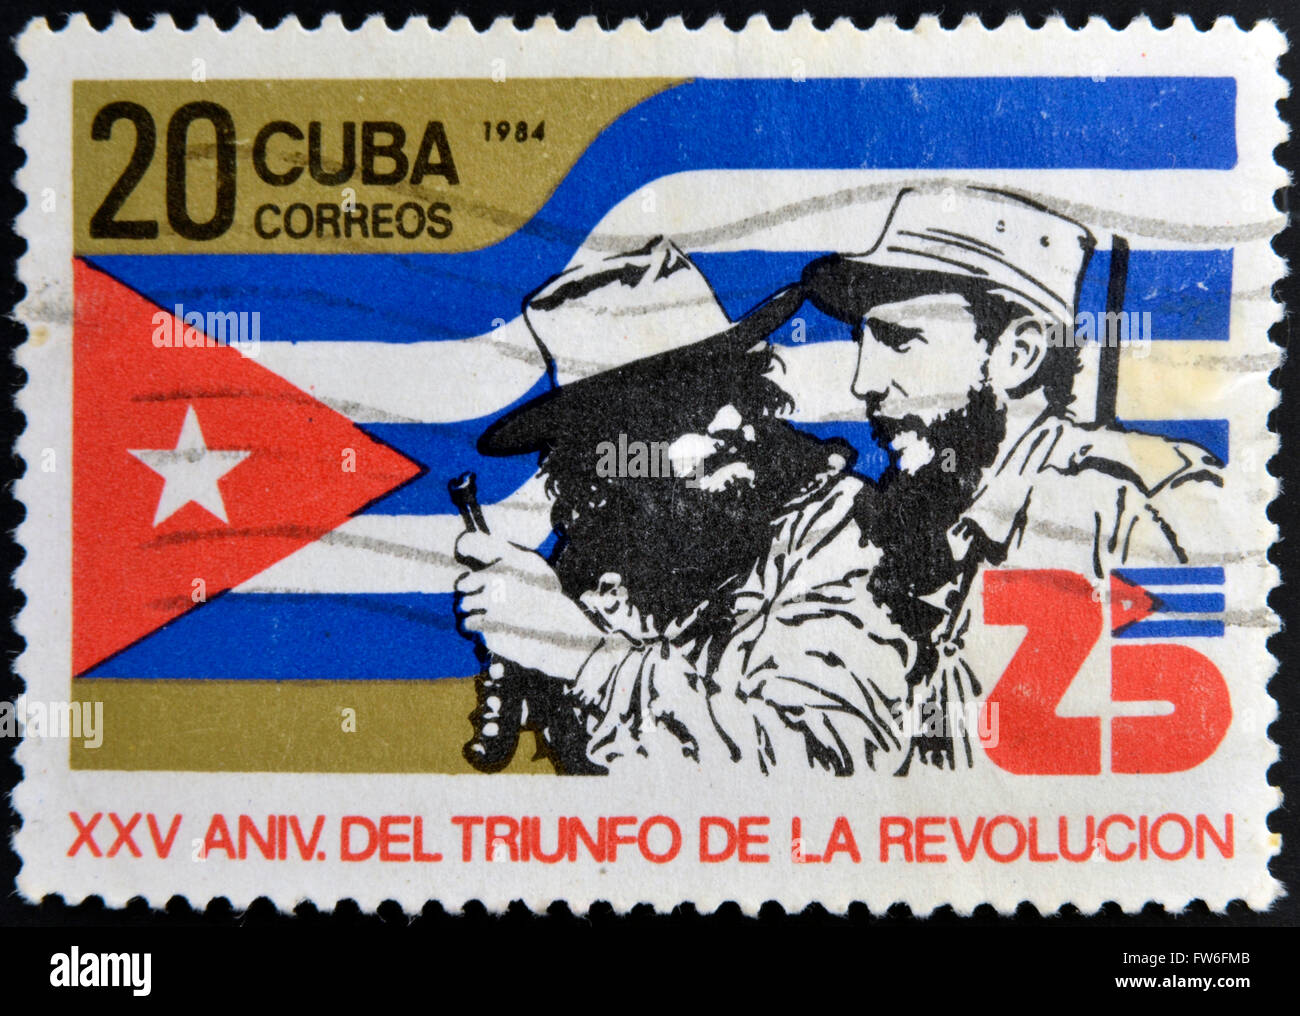 CUBA - CIRCA 1984: A Stamp dedicated to 25th Anniversary of the Victory of the Cuban Revolution, shows Fidel Castro Stock Photo